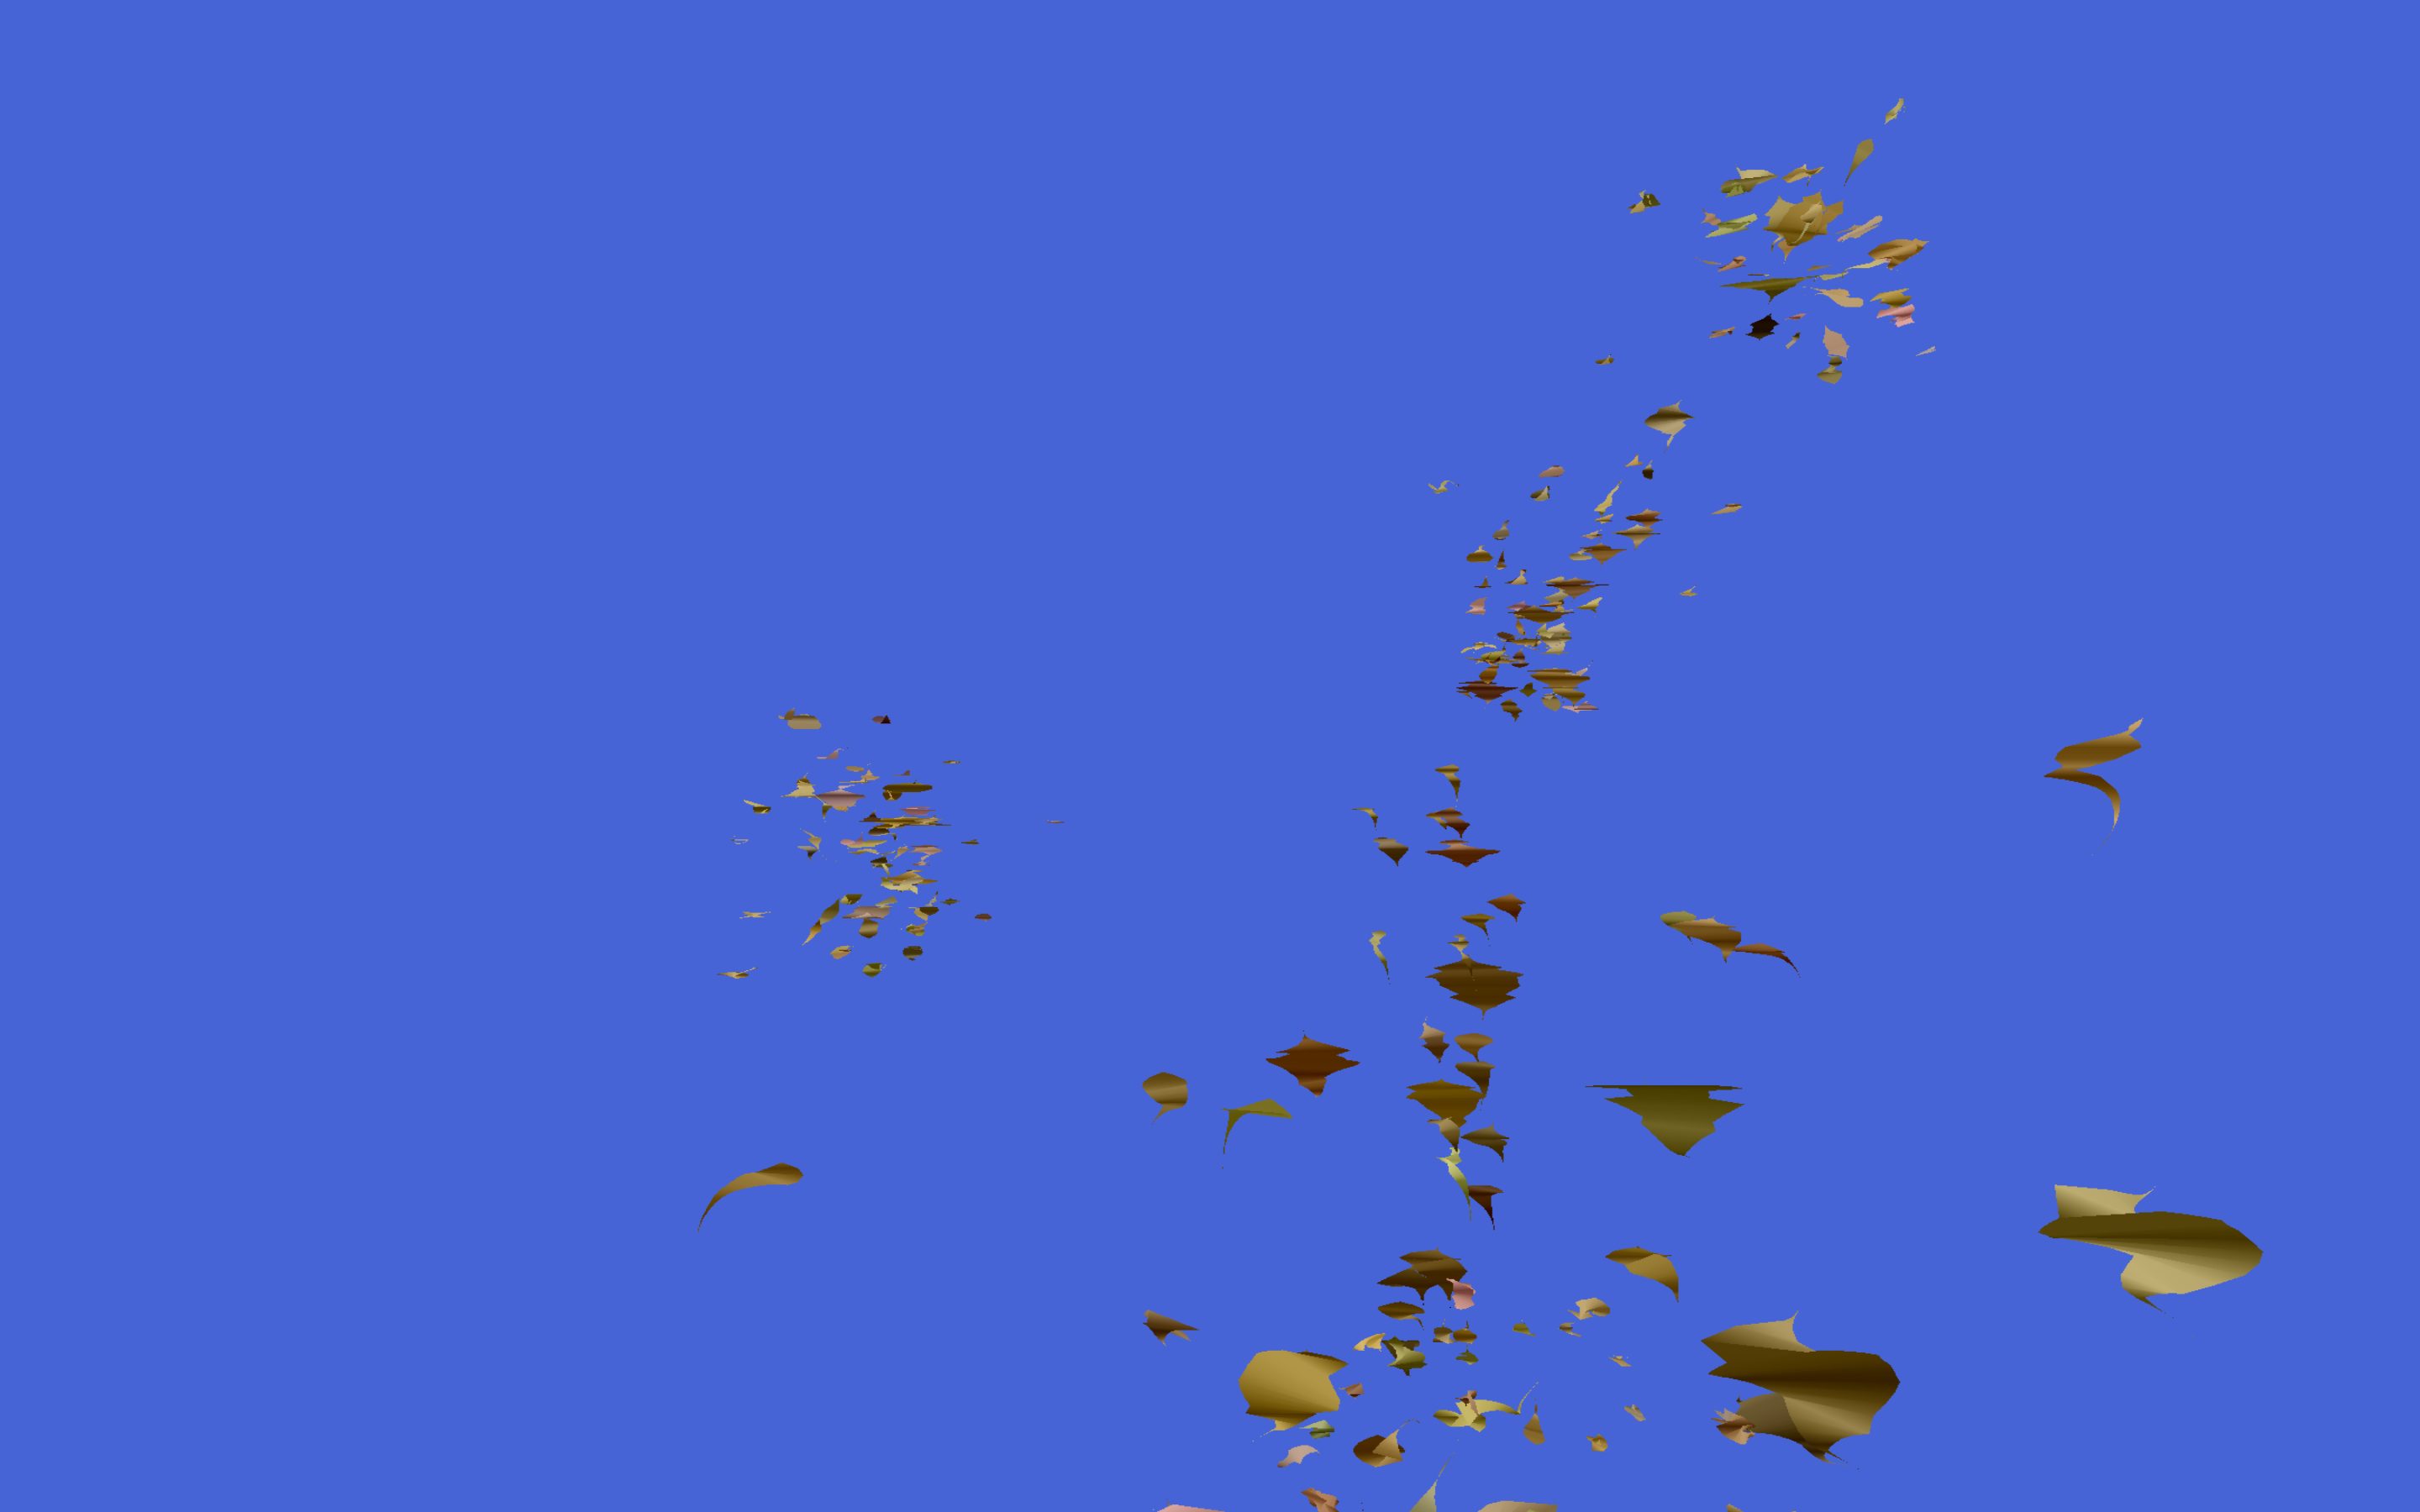 A bunch of yellow-brown-gradient polygons clustered around a solid sky-blue background.